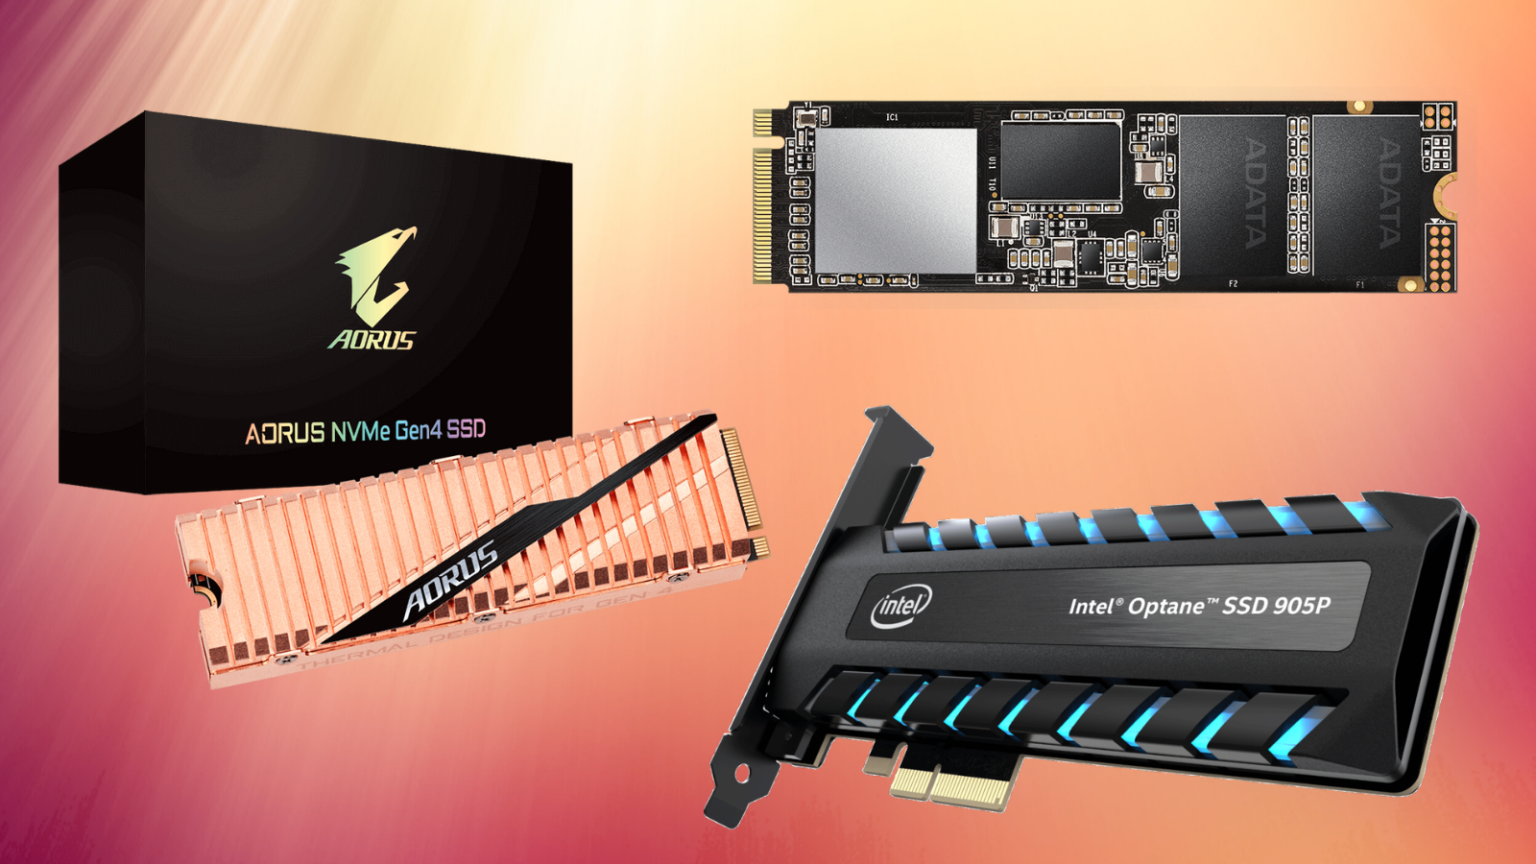 8 Best M2 Nvme Ssds To Buy In 2020 For Blazing Fast Data Transfer 2703